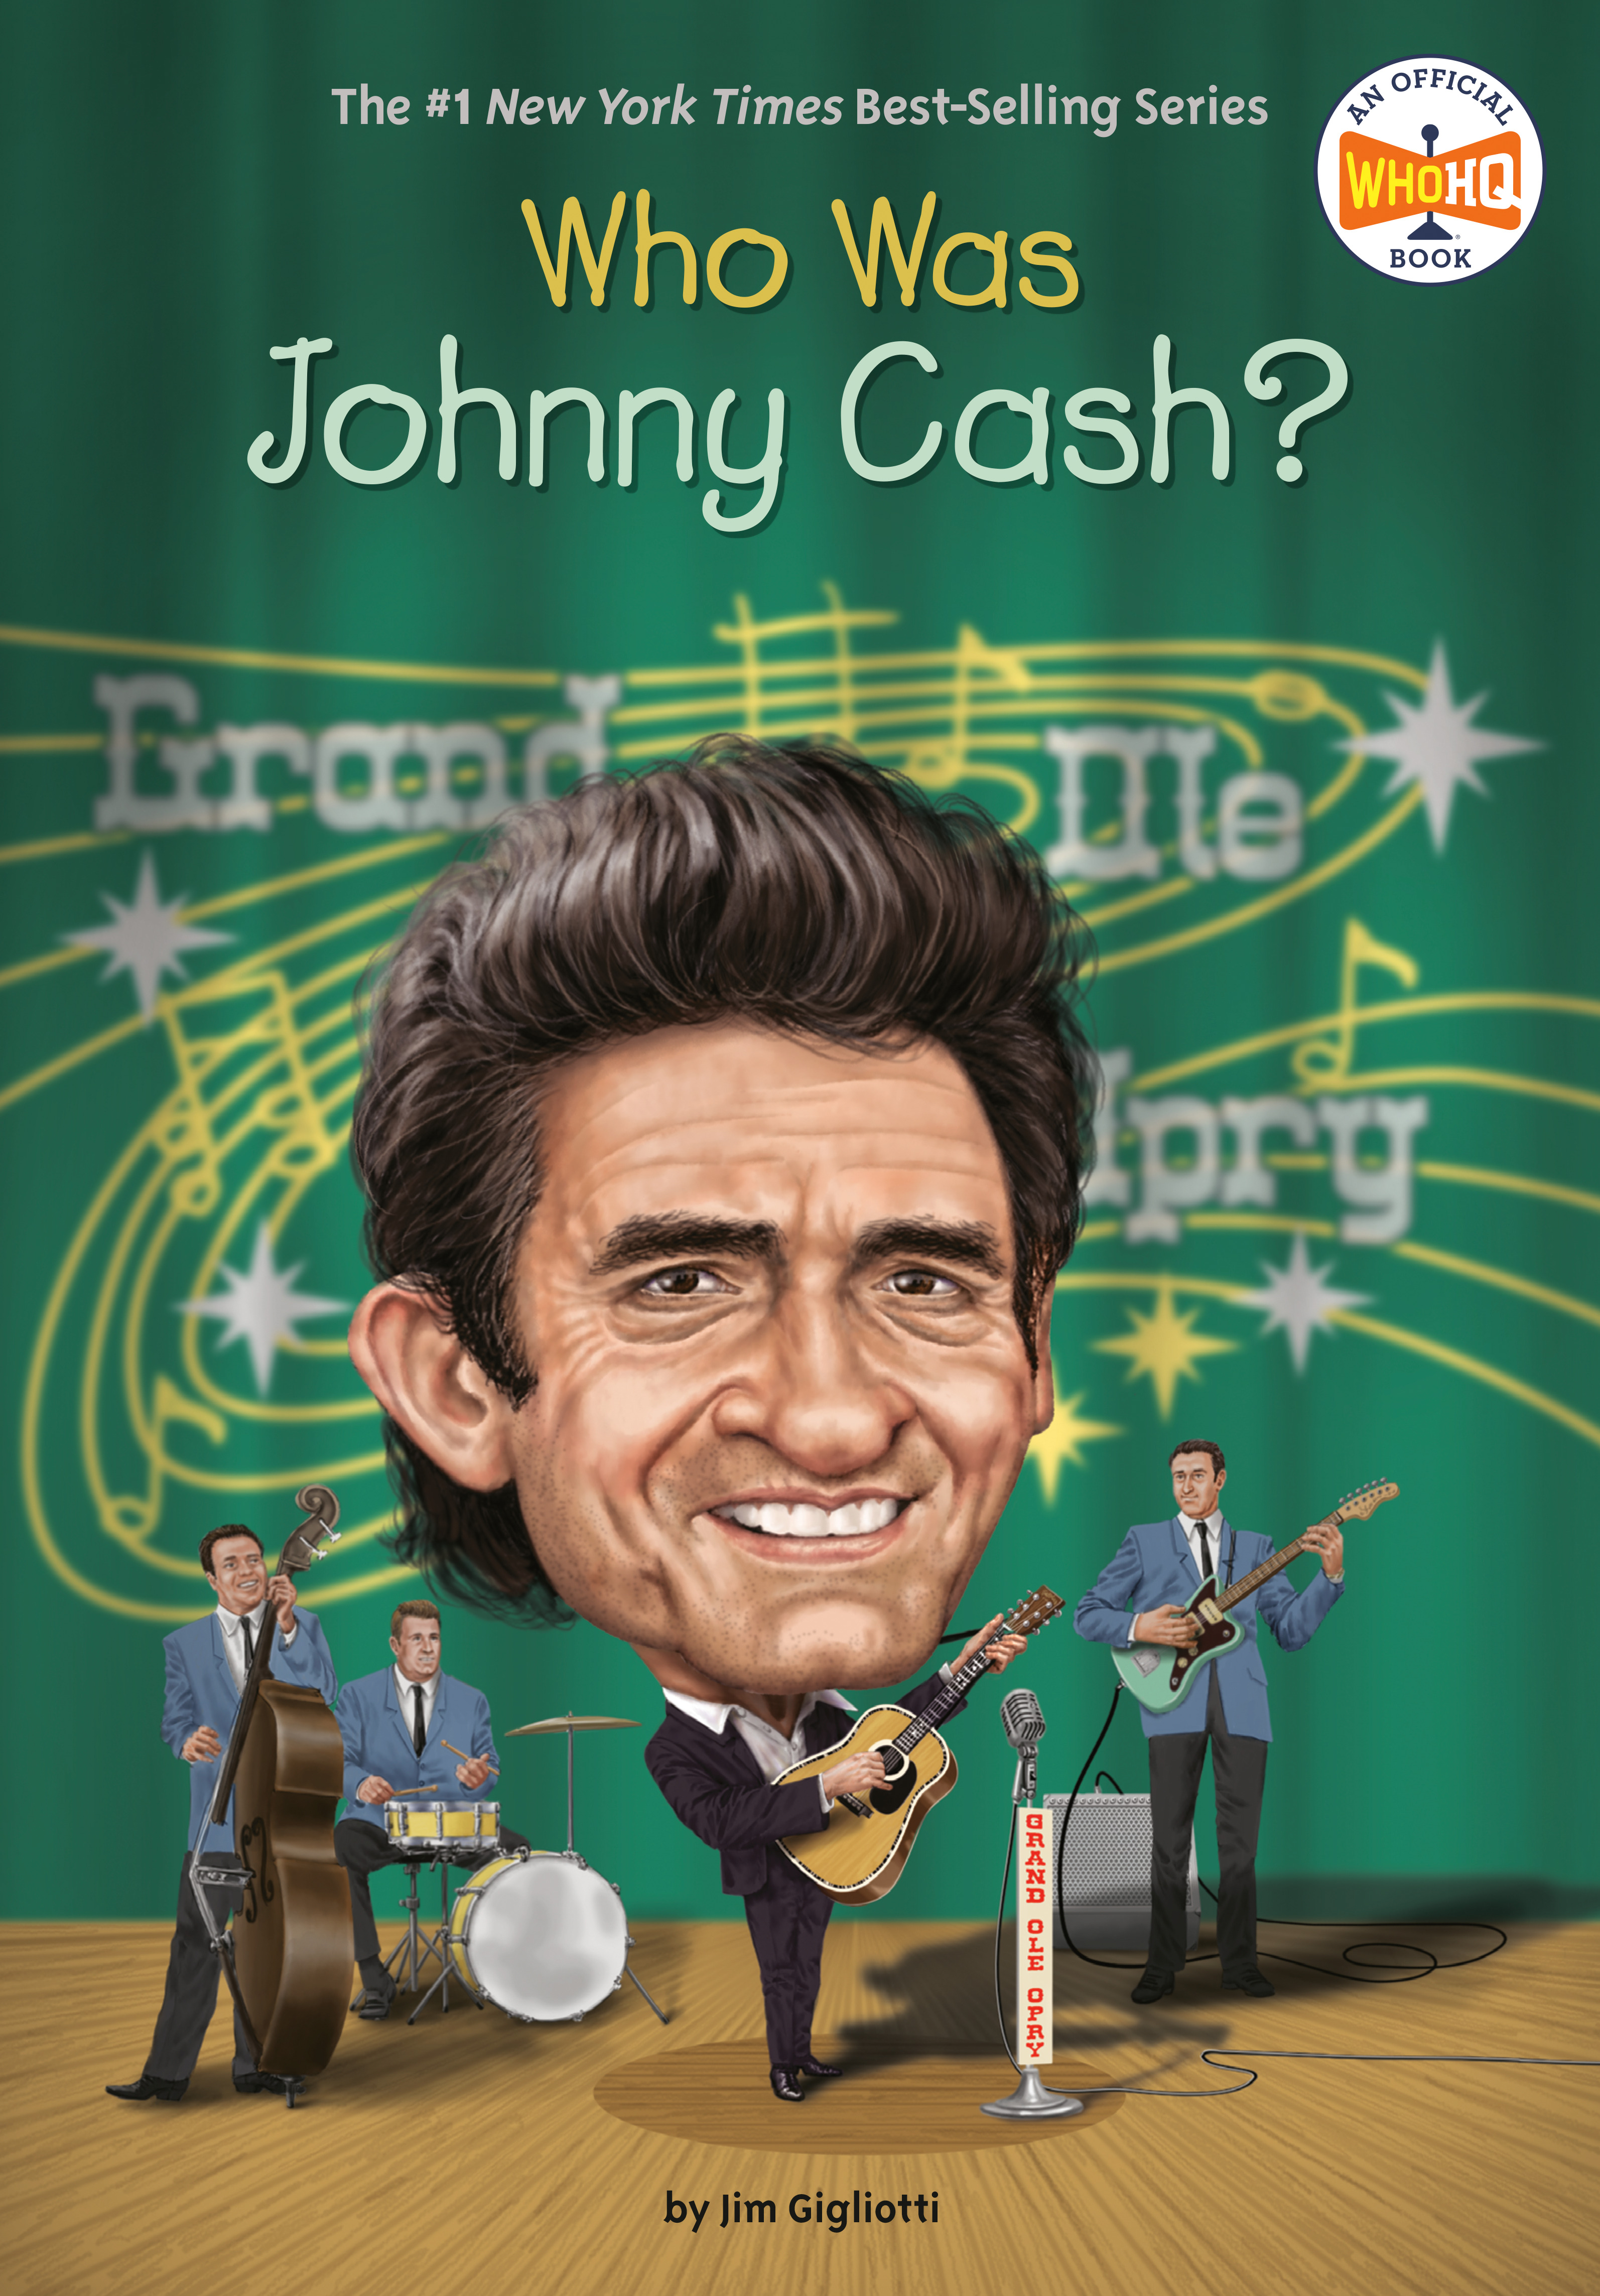 Who Was? - Who Was Johnny Cash? | Gigliotti, Jim